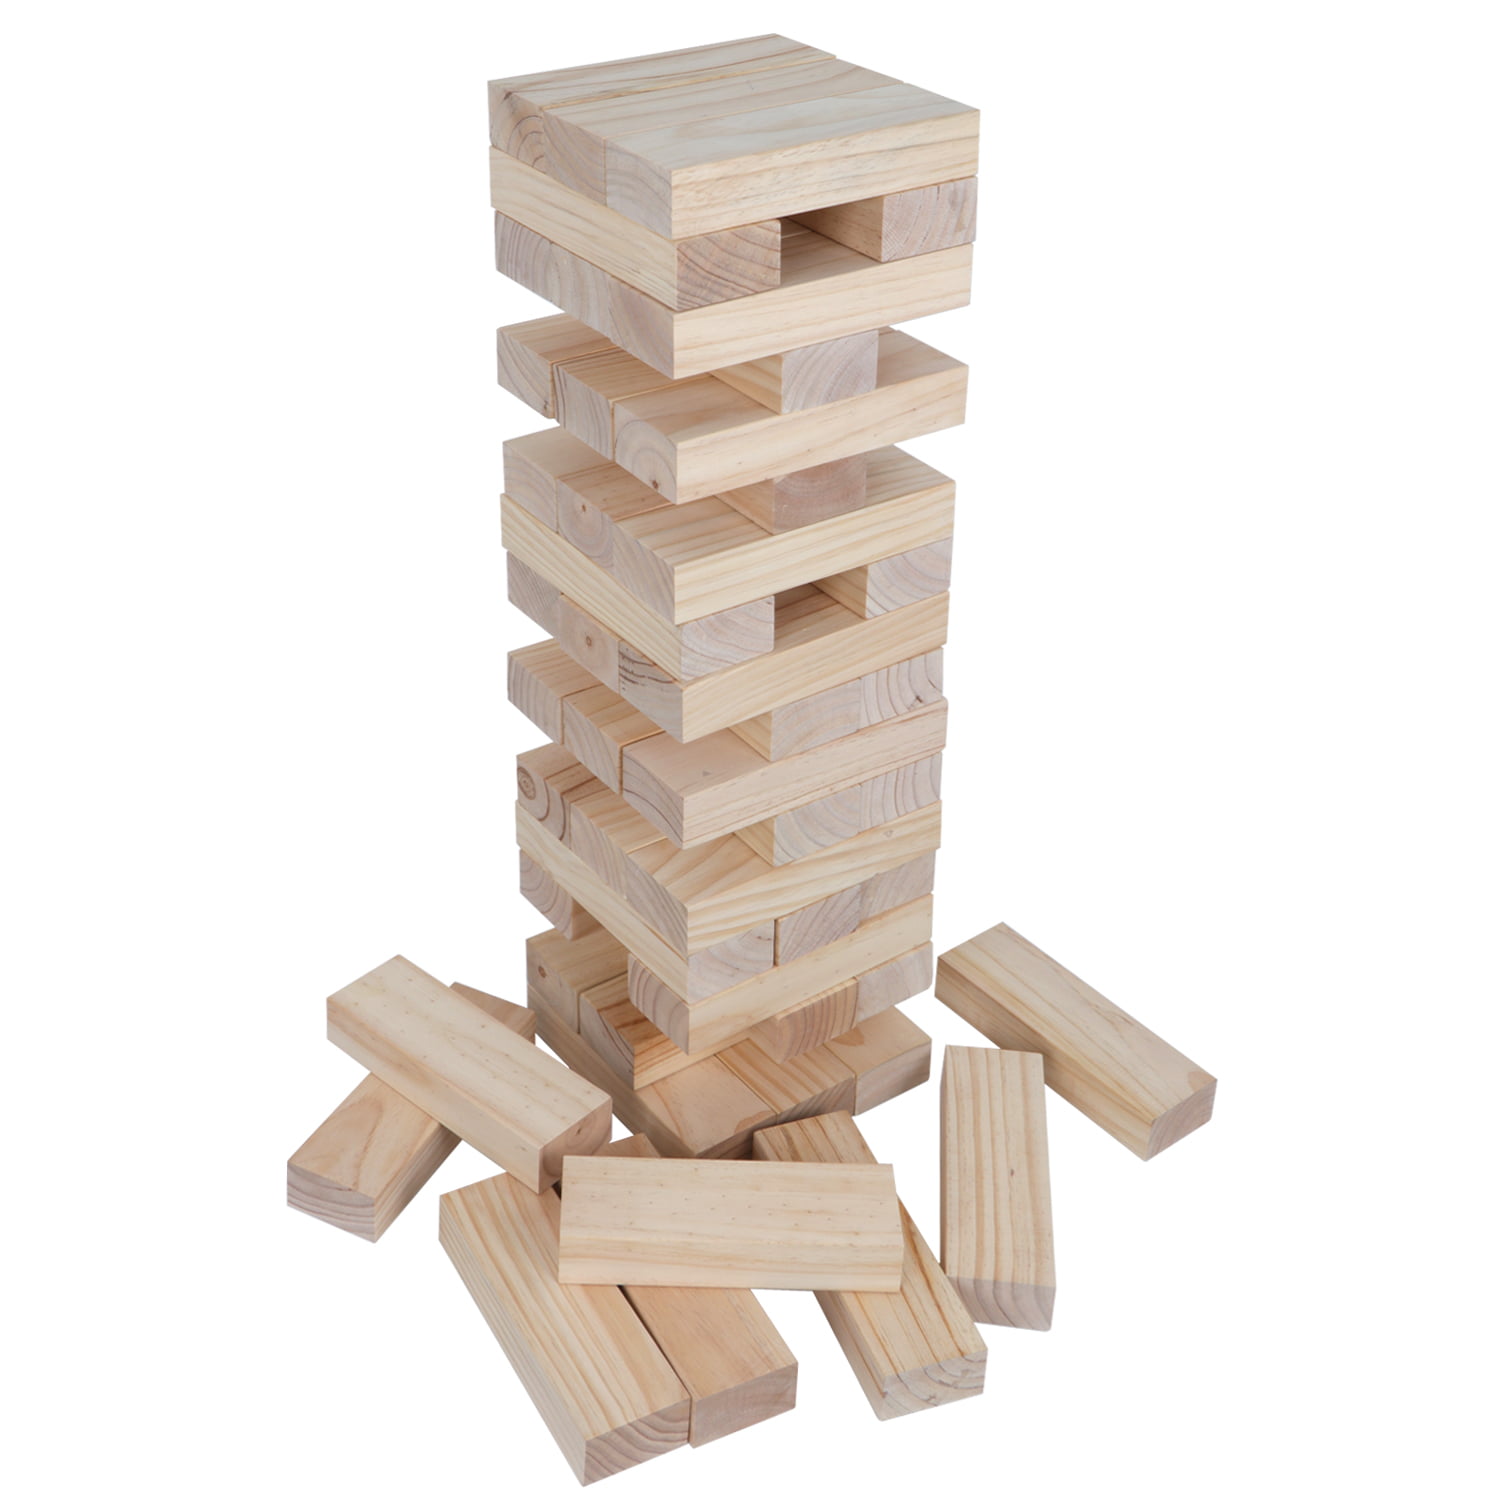 Wood Giant Toppling Tumble Tower Indoor Outdoor Party Game Toy No Print Version 